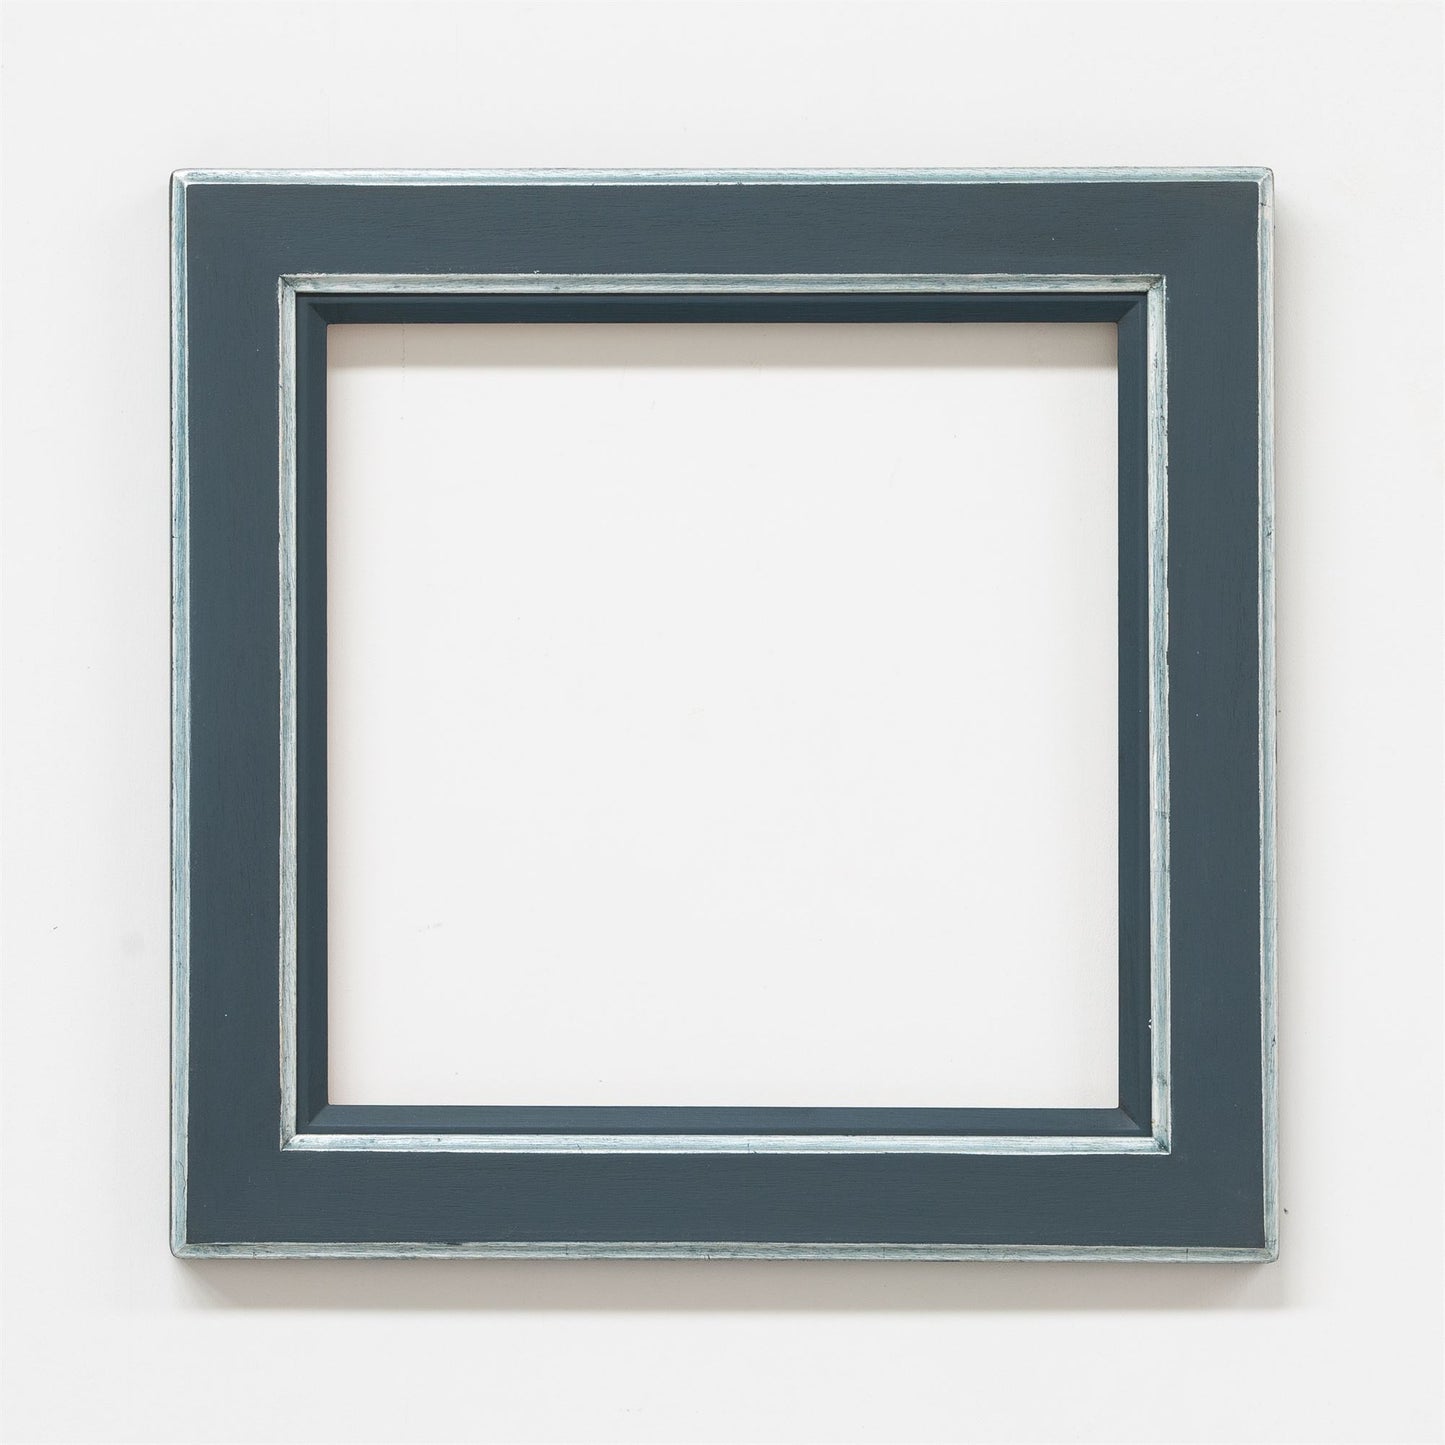 AB10 Standard Painted Frame with Silver Metal Leaf Finish